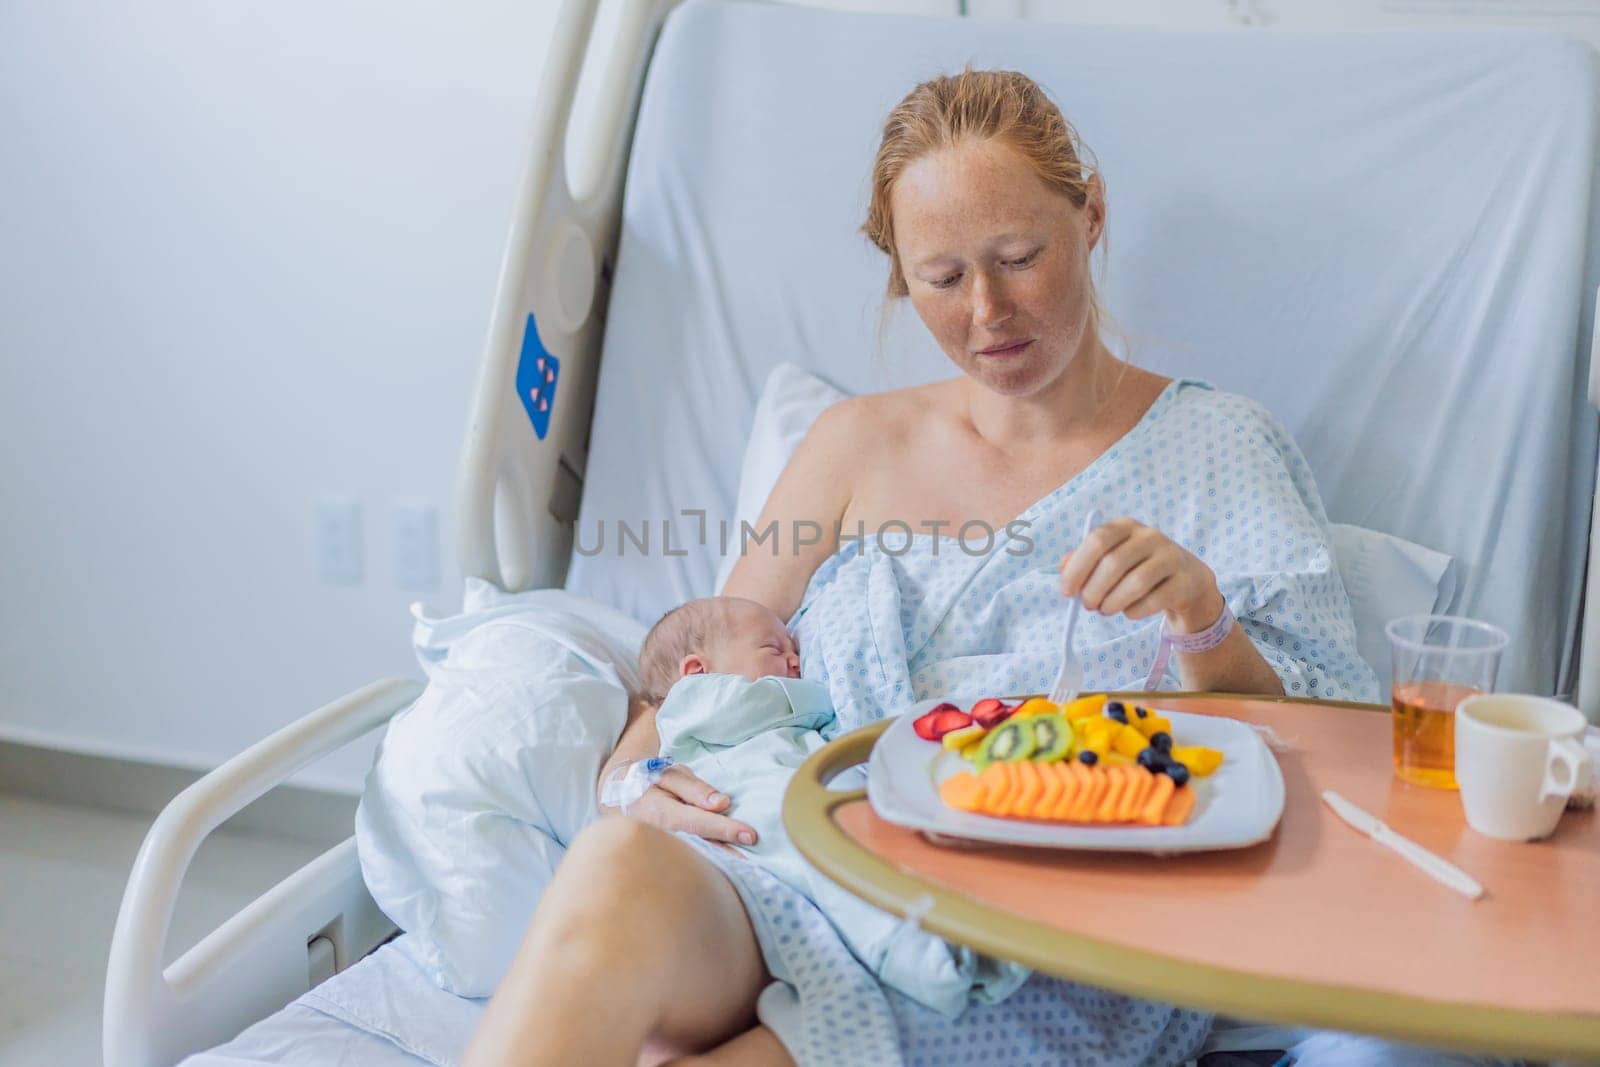 A woman breastfeeds her baby in the hospital while simultaneously having lunch herself. This moment of multitasking illustrates the balance between motherhood and self-care, emphasizing maternal dedication and the nurturing atmosphere of the hospital ward.